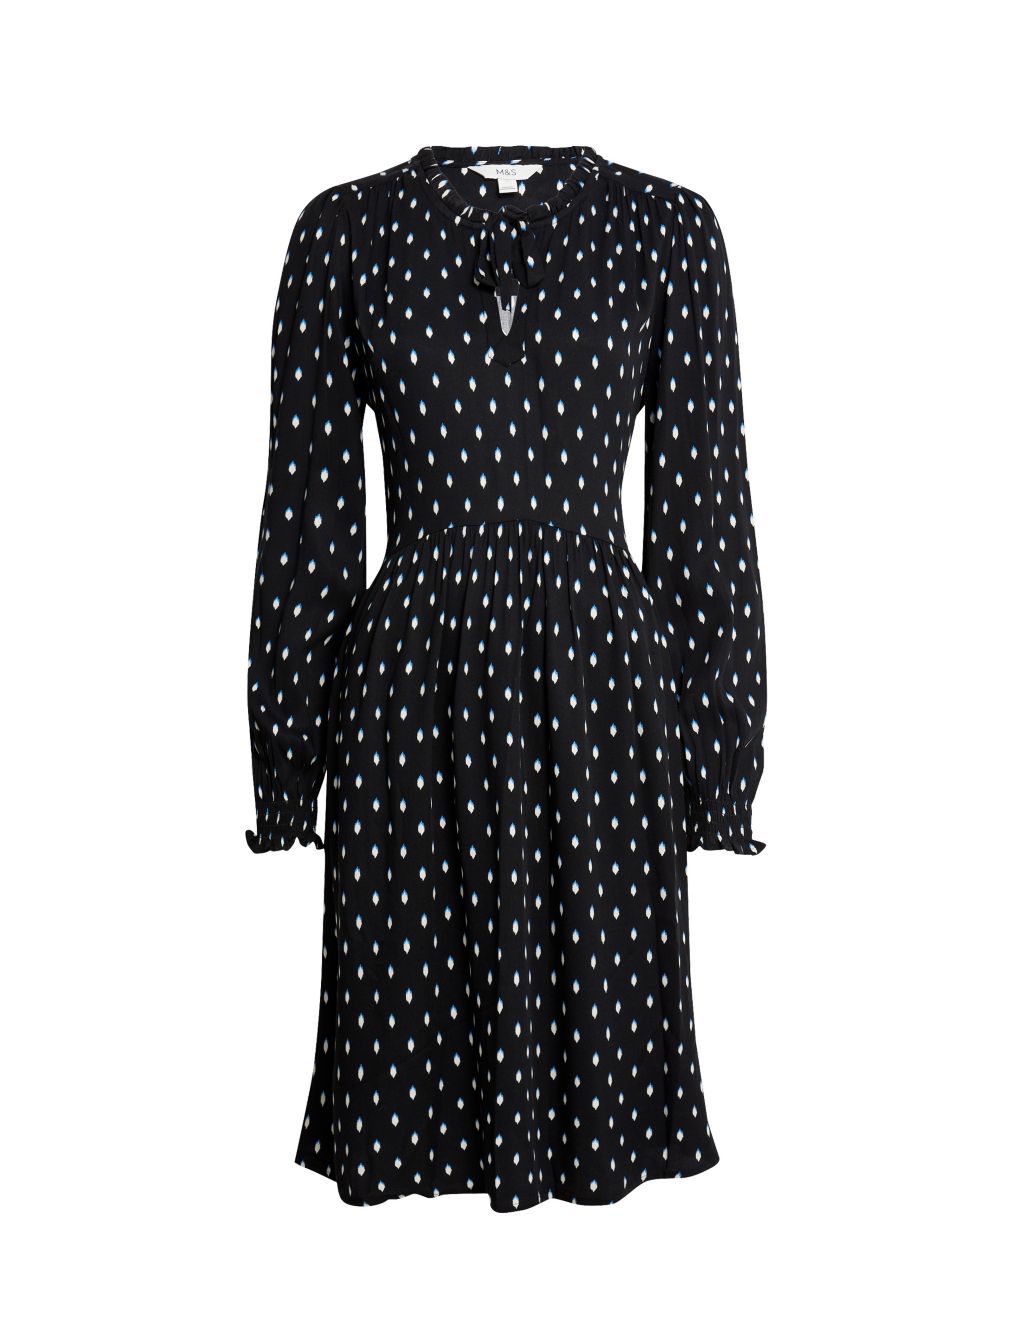 Printed Tie Neck Mini Relaxed Dress image 2